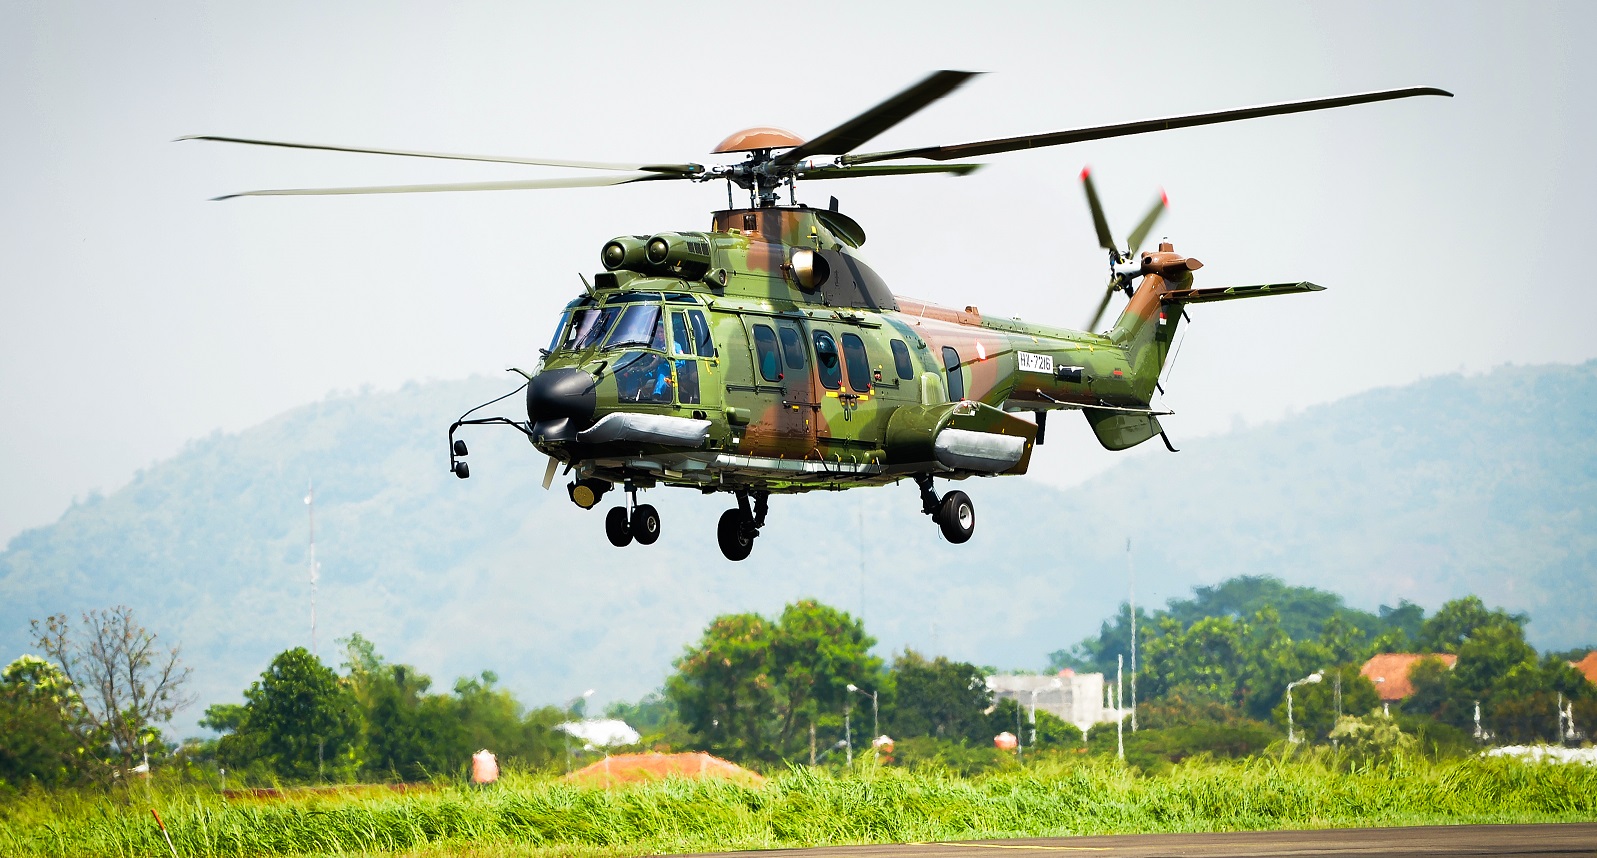 The H225M helicopters will be delivered to the Indonesian Air Force upon reassembly and completion of the mission equipment outfitting and customization by PTDI. PTDI Photo